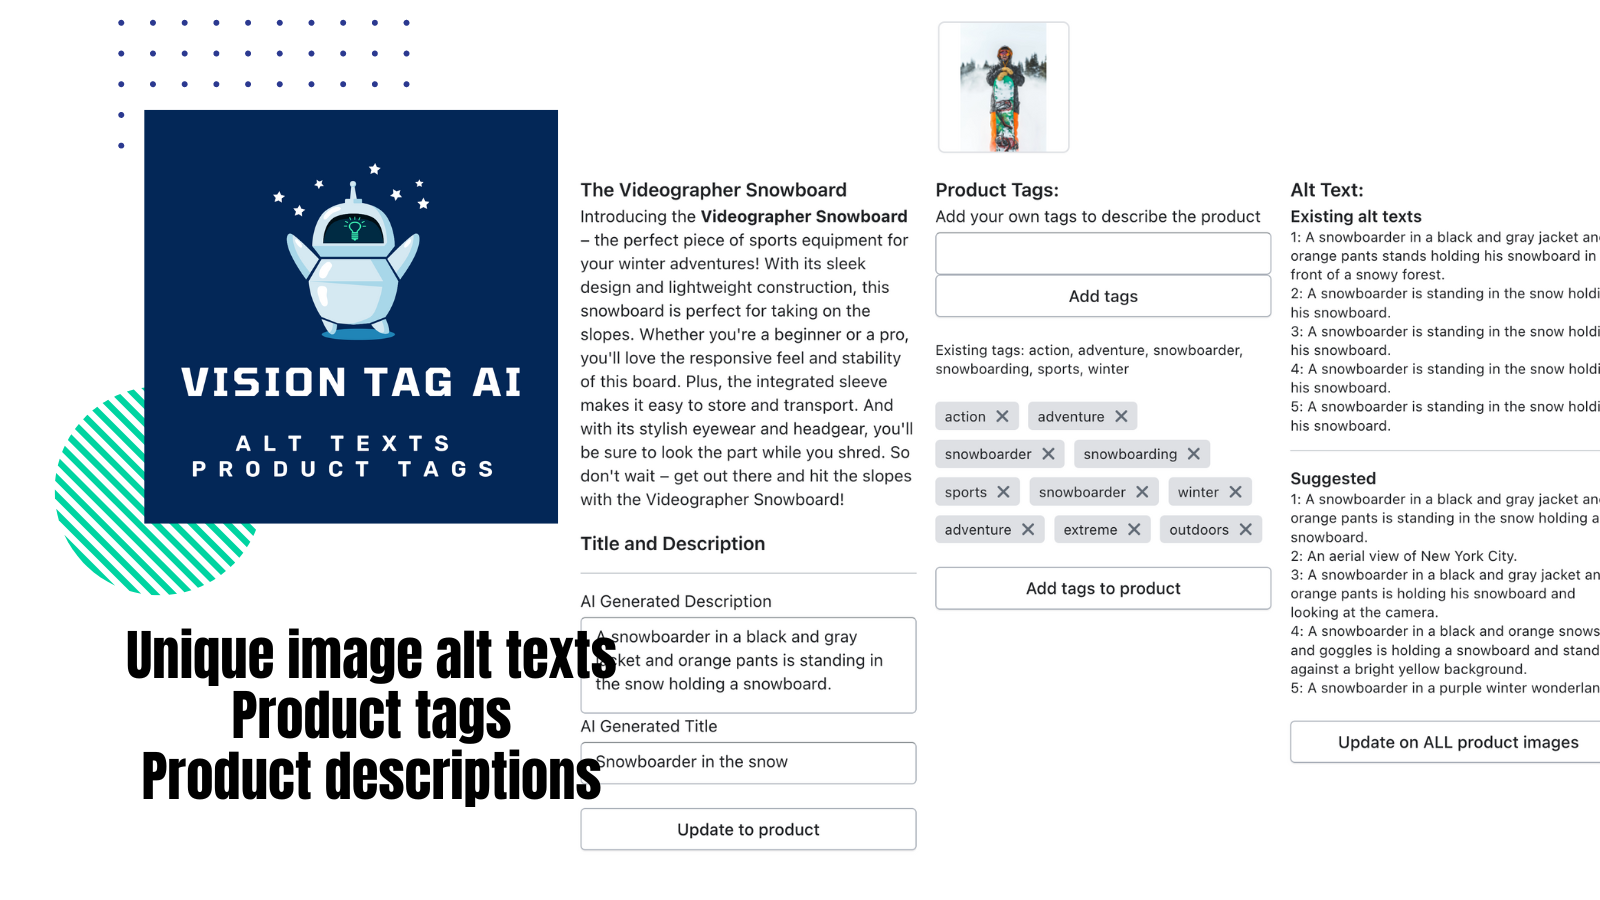 VisionTag AI for Alt Text, Filename and Product Tag/Description